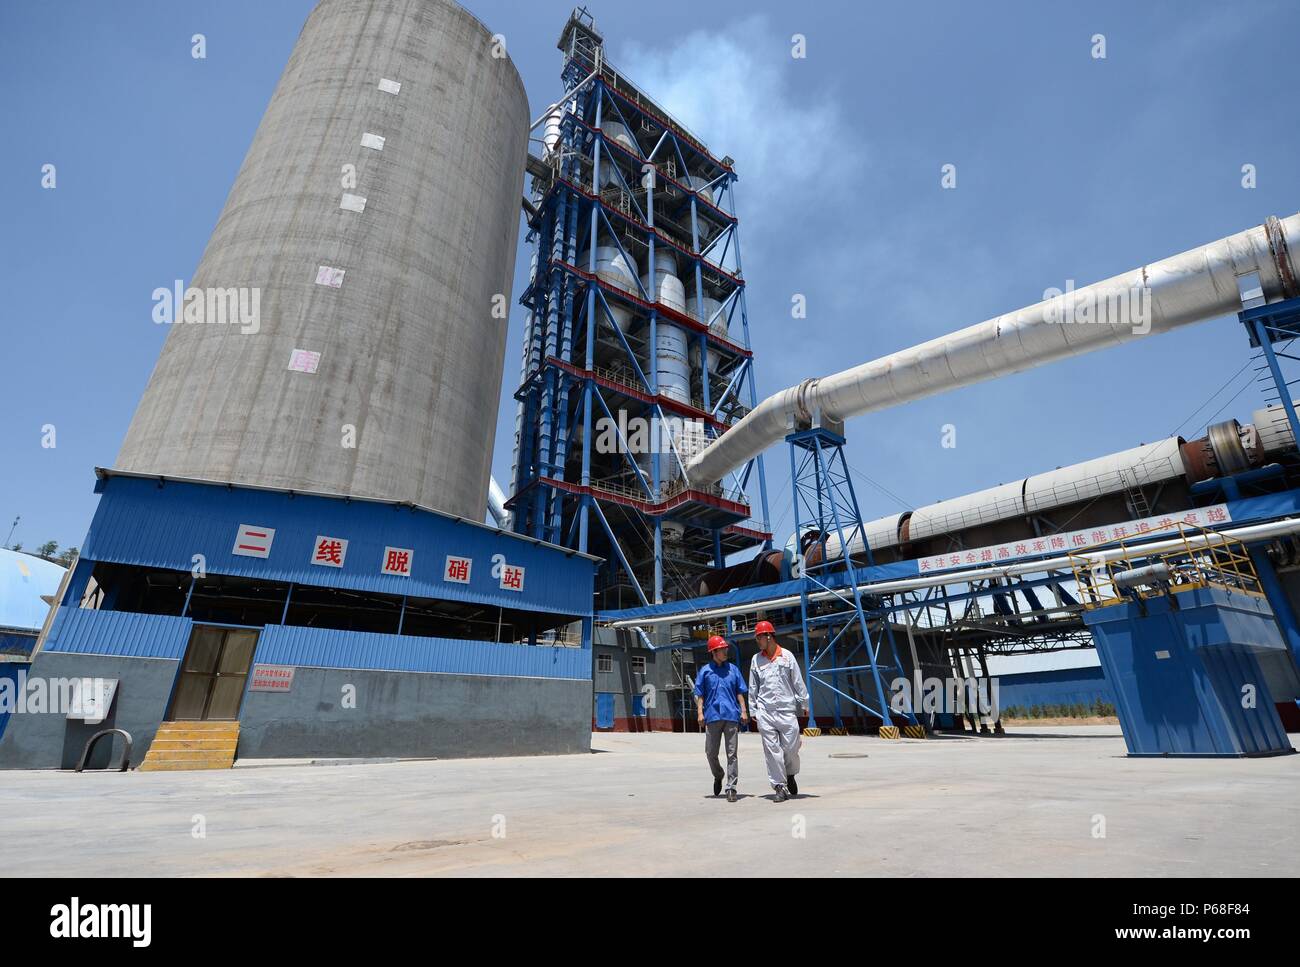 Xi'an, China's Shaanxi Province. 5th June, 2018. Workers are seen at a cement plant of the Shengwei Group in Tongchuan City, northwest China's Shaanxi Province, June 5, 2018. Tongchuan, once a manufacturing base for coal mining industry and cement production, used to suffer from environment pollutions. The local government has focused on sustainable development in the recent years and helped industries transform to grasp more opportunities. Credit: Li Yibo/Xinhua/Alamy Live News Stock Photo